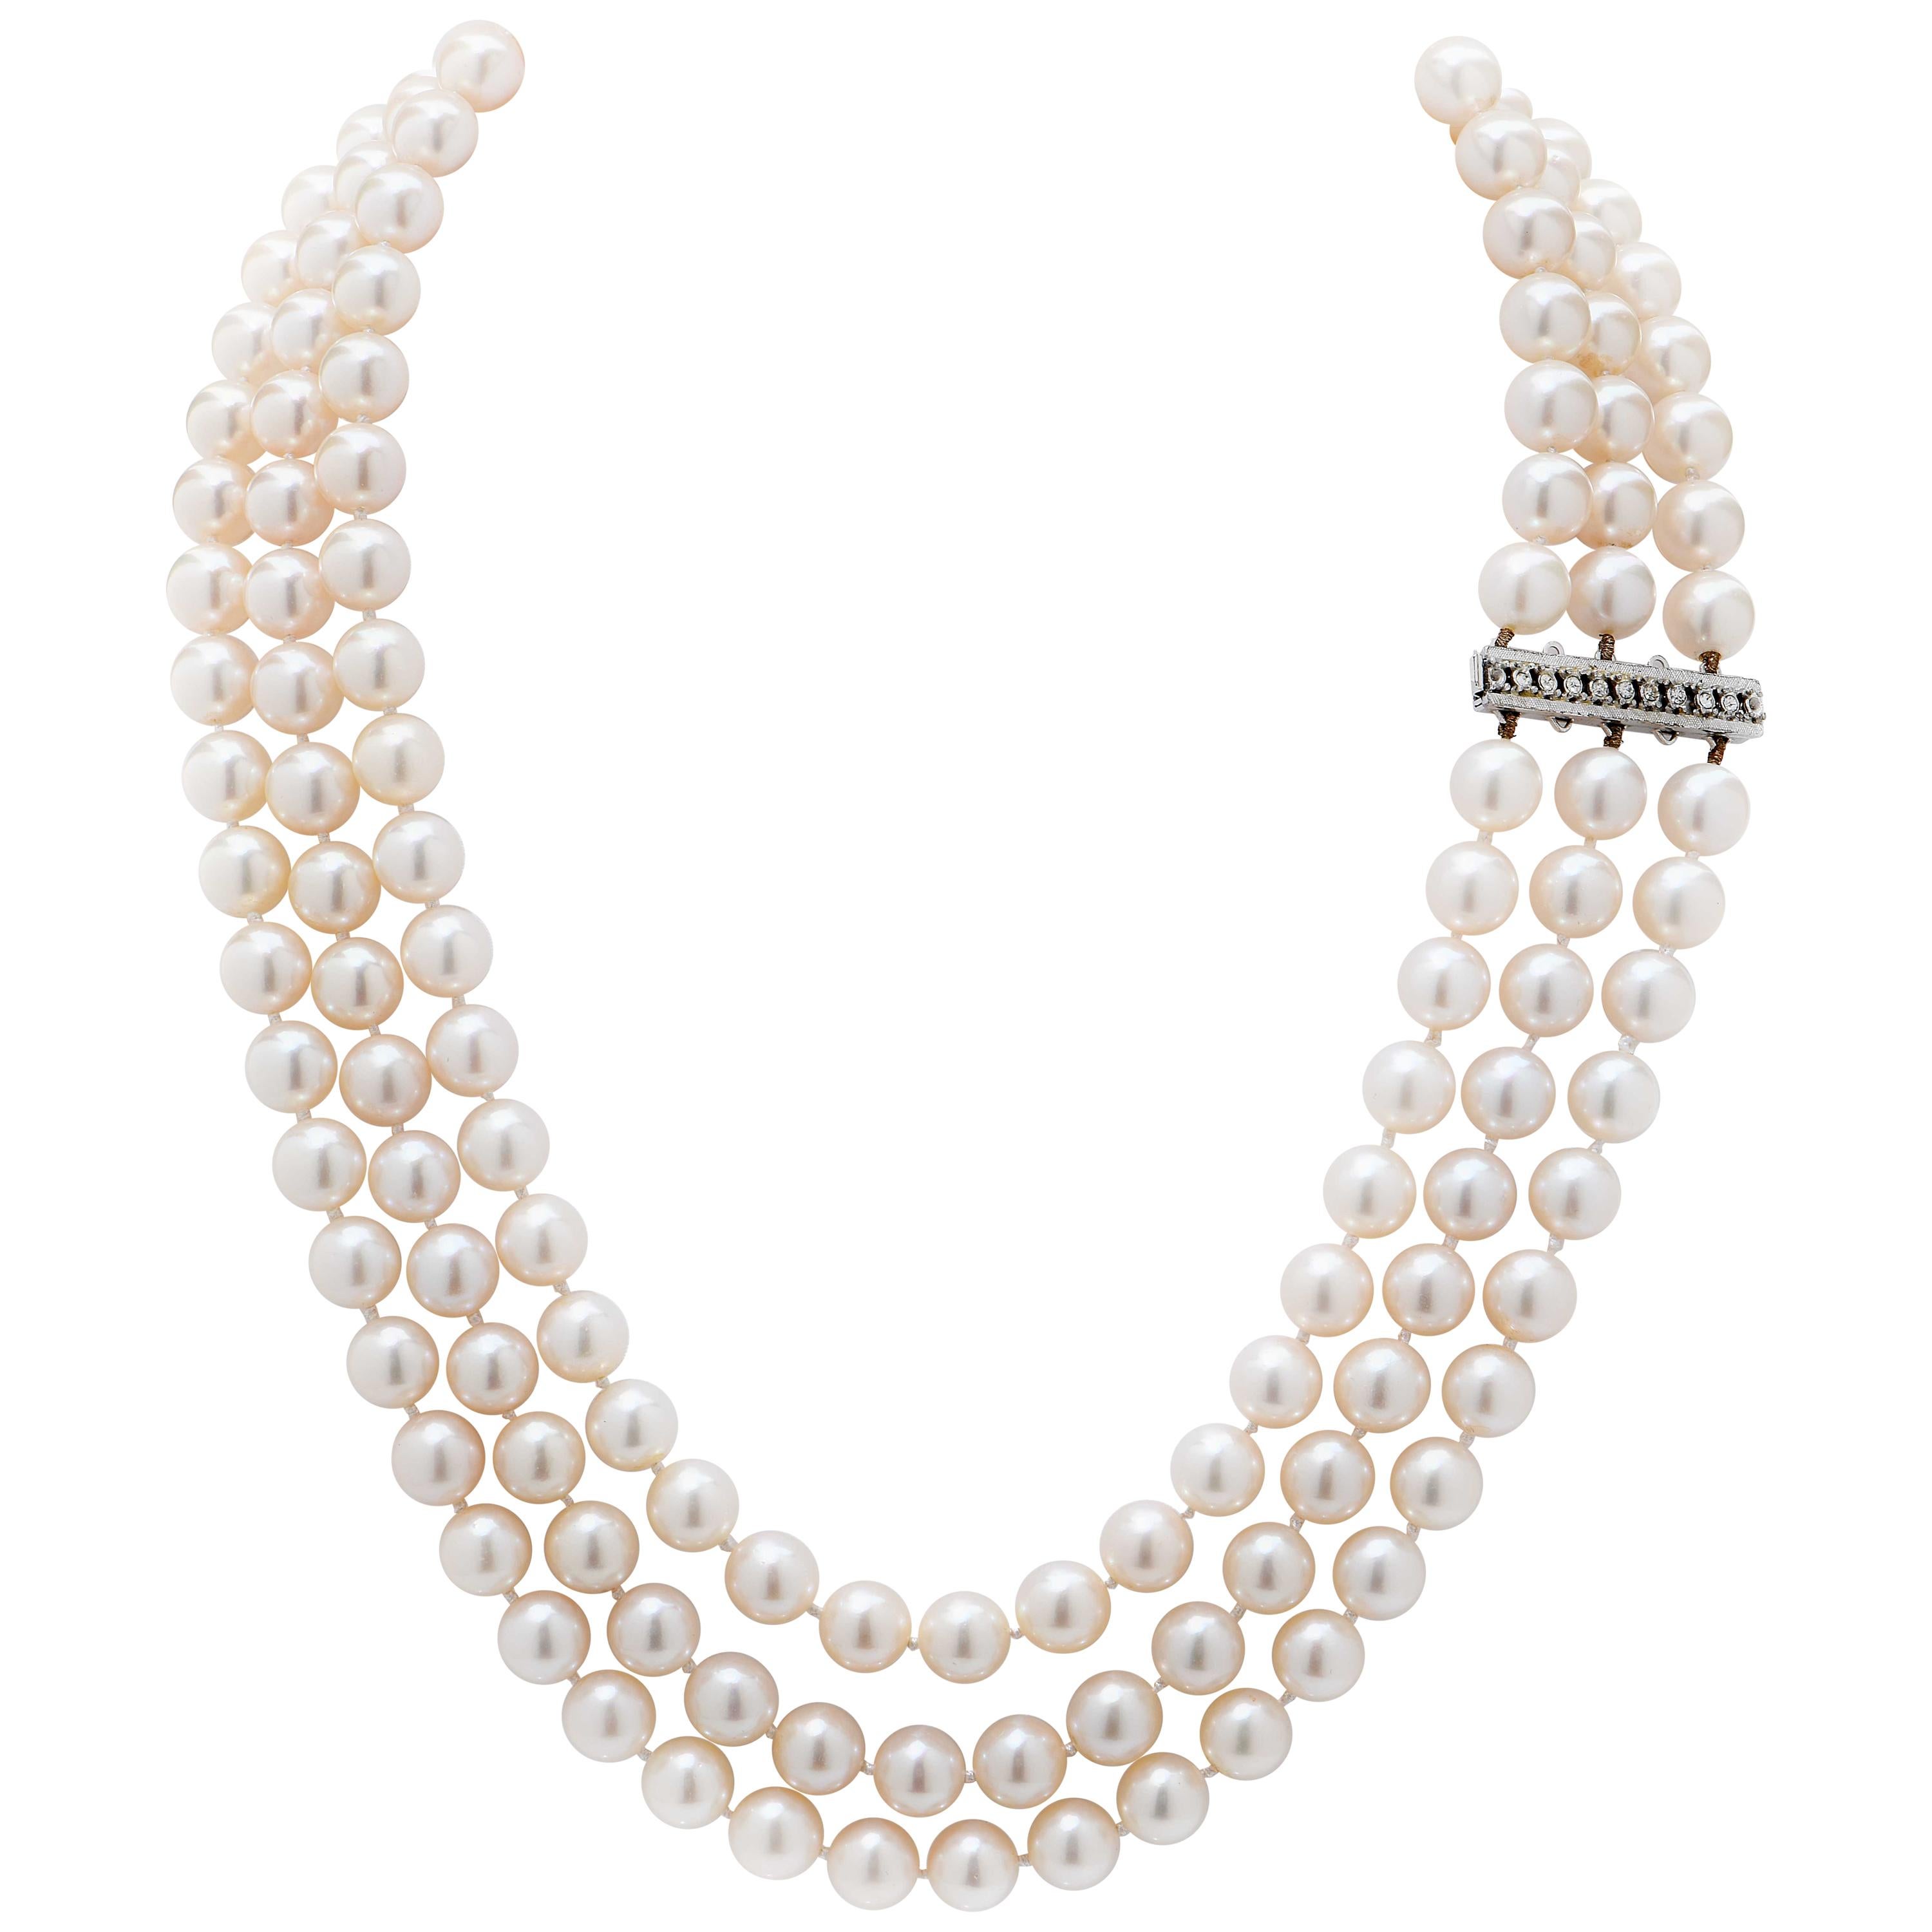 Great Quality Akoya Triple Row Cultured Pearl Necklace with Diamond Clasp